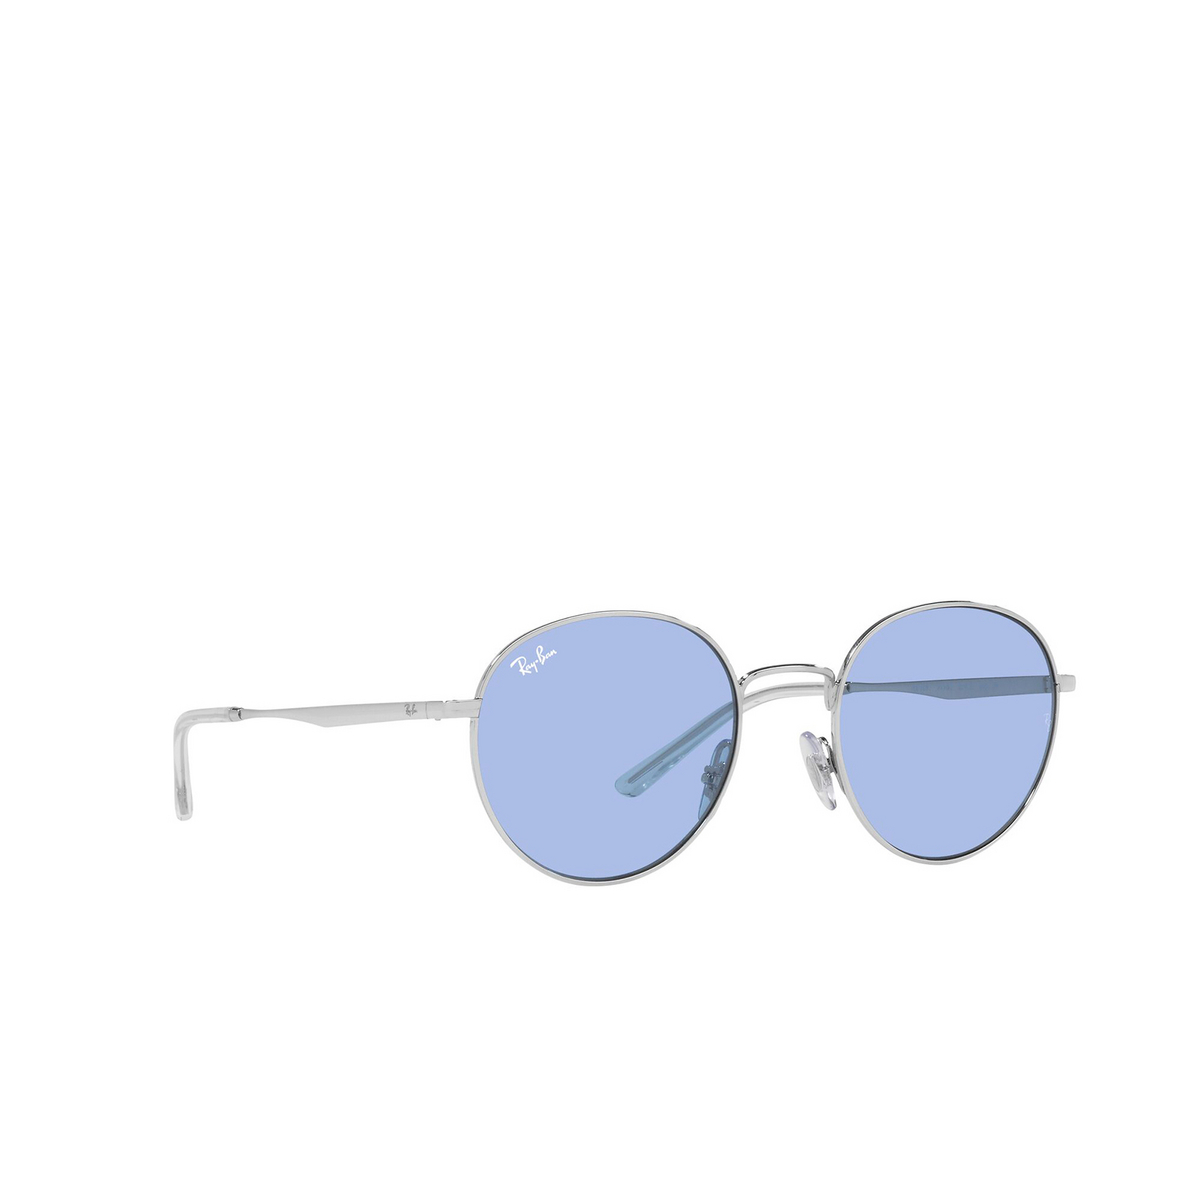 Ray-Ban® Round Sunglasses: RB3681 color Silver 003/80 - three-quarters view.